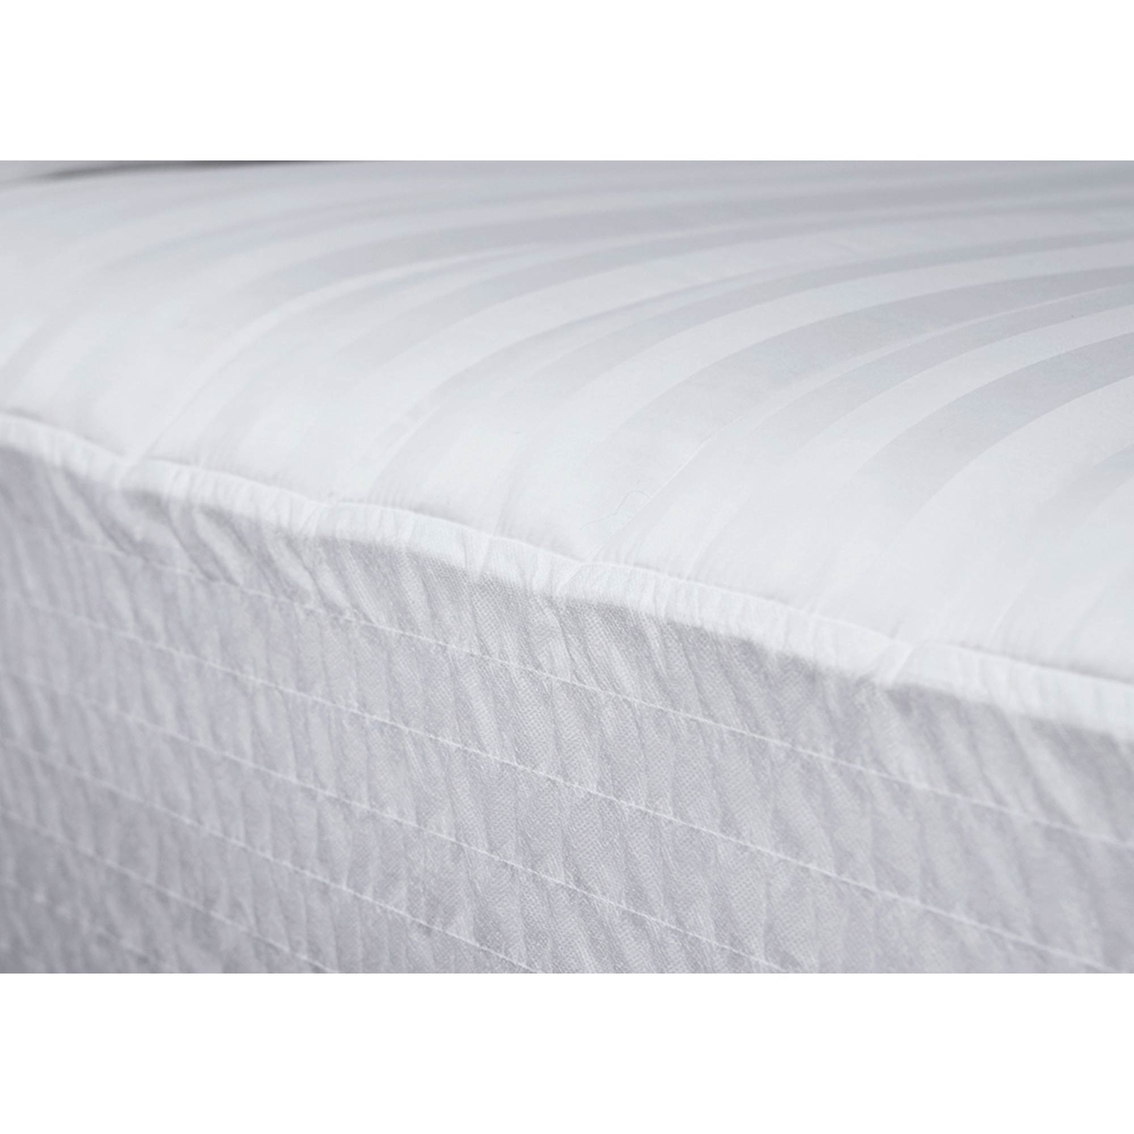 Beautyrest Extra Protection Mattress Pad - Image 3 of 3